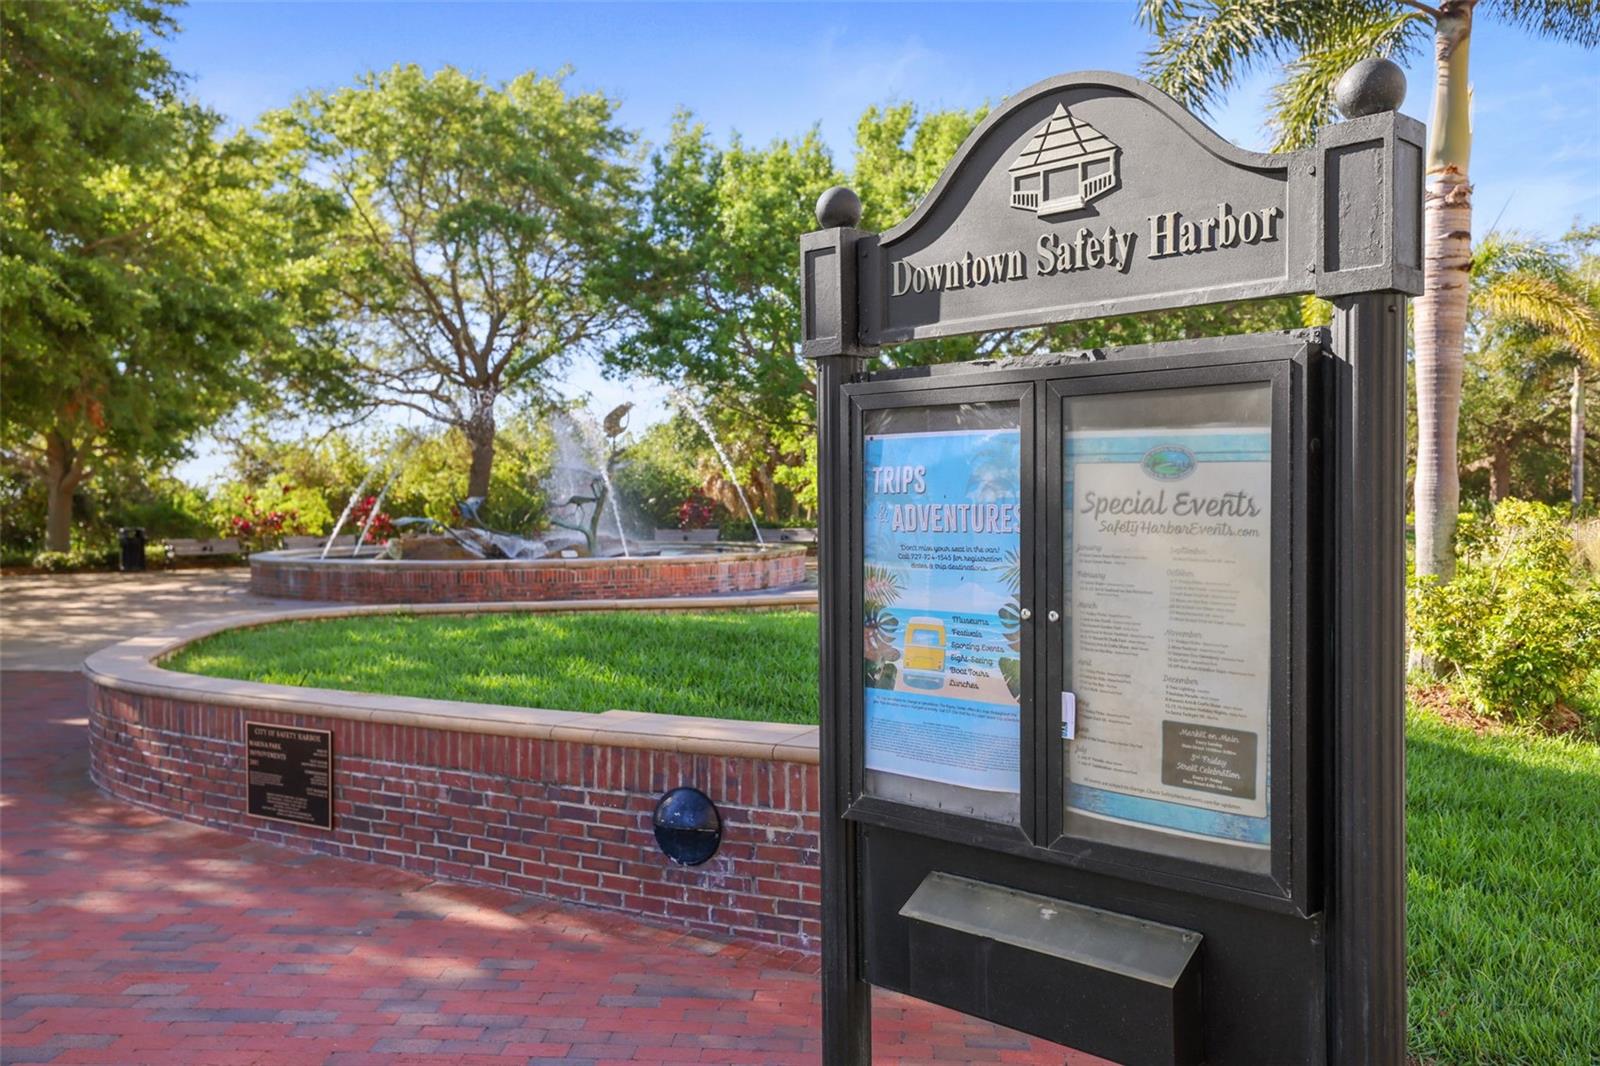 Charming Safety Harbor has been a favorite little town to visit for a century!